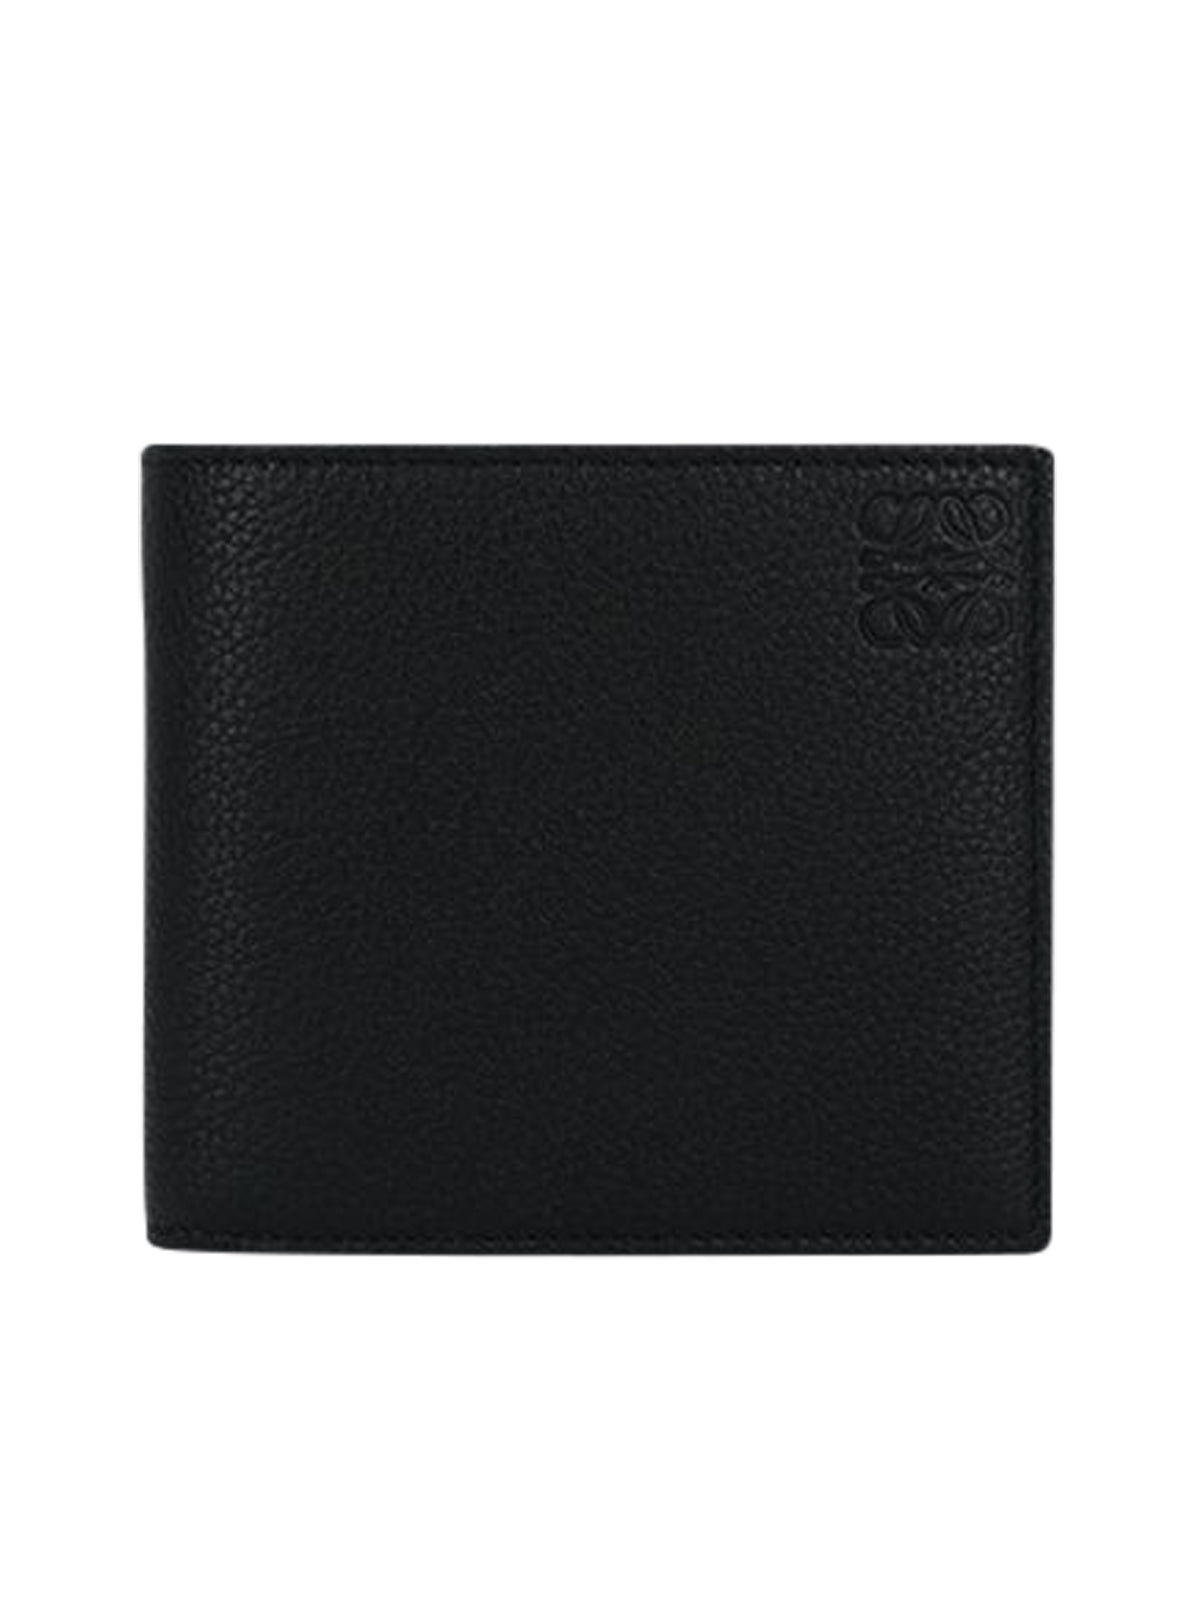 TUMBLED LEATHER BILLFOLD WALLET